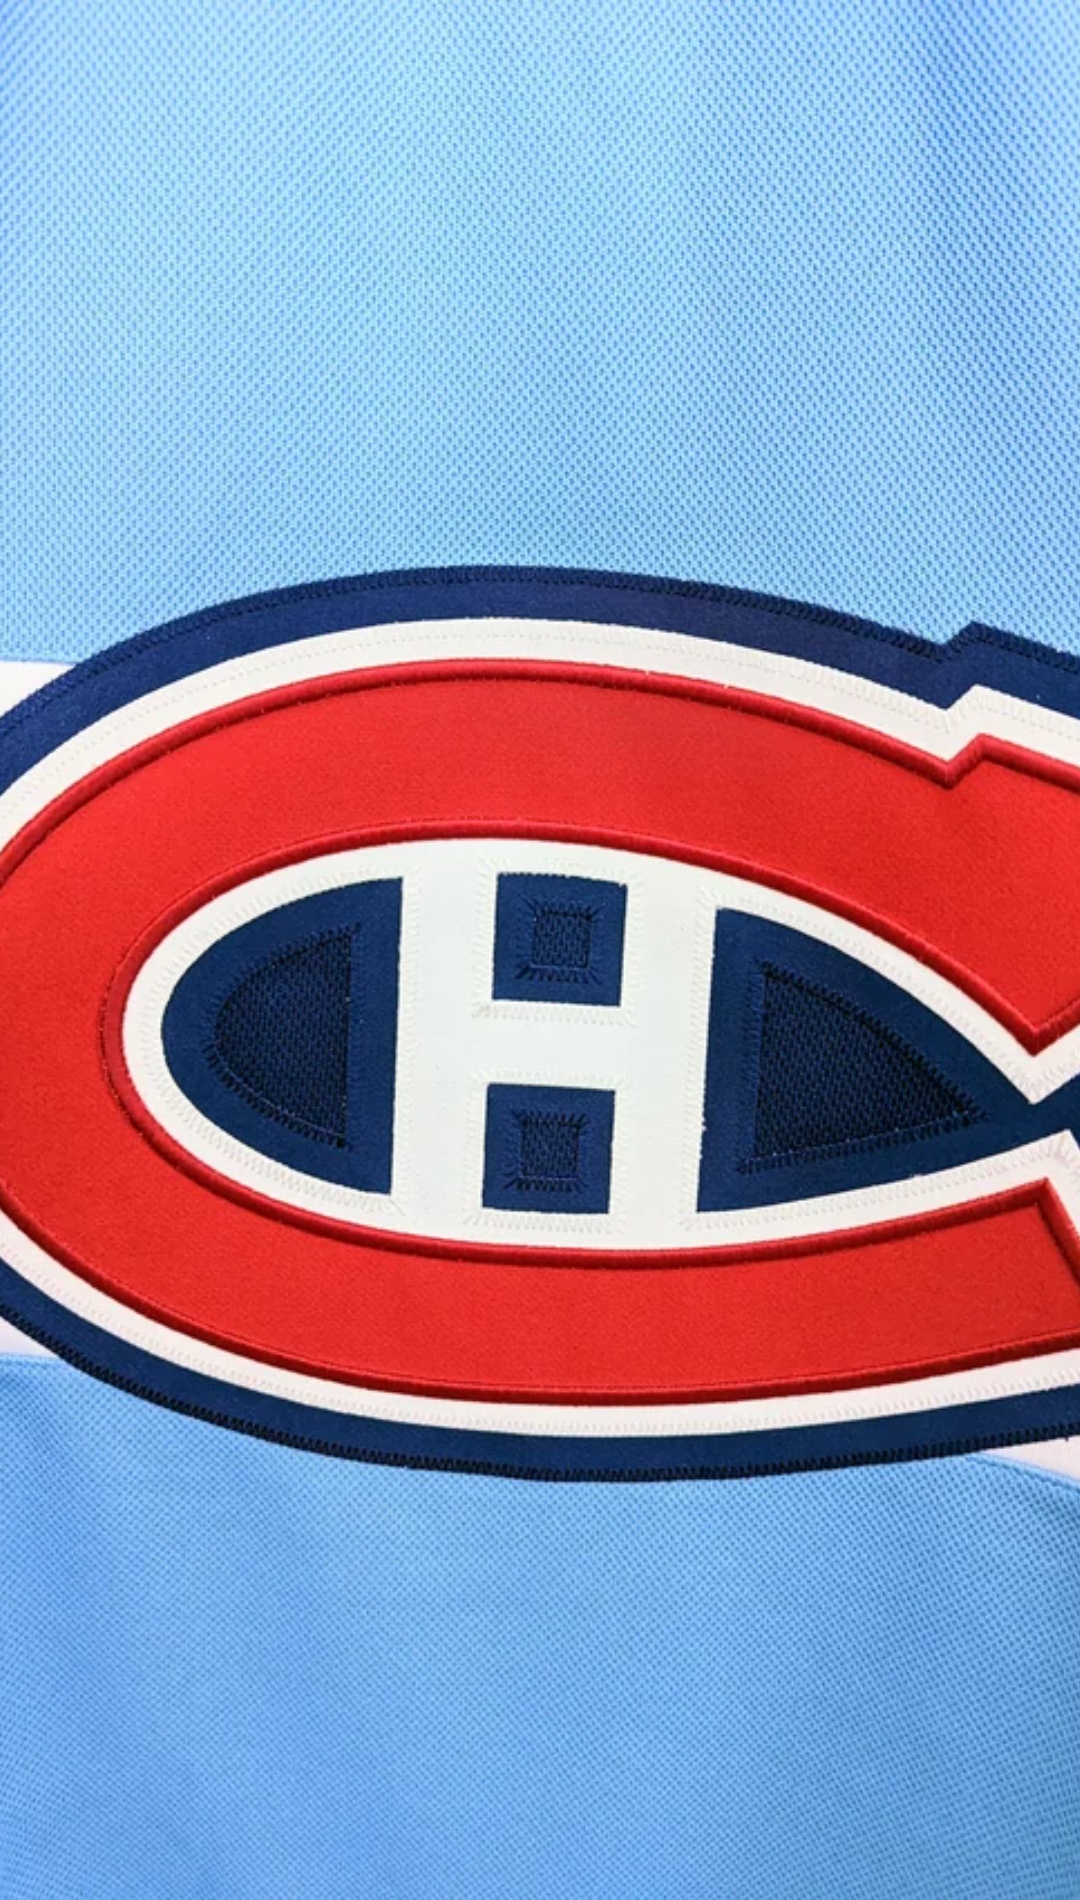 Montreal Canadiens Wallpaper Pictures